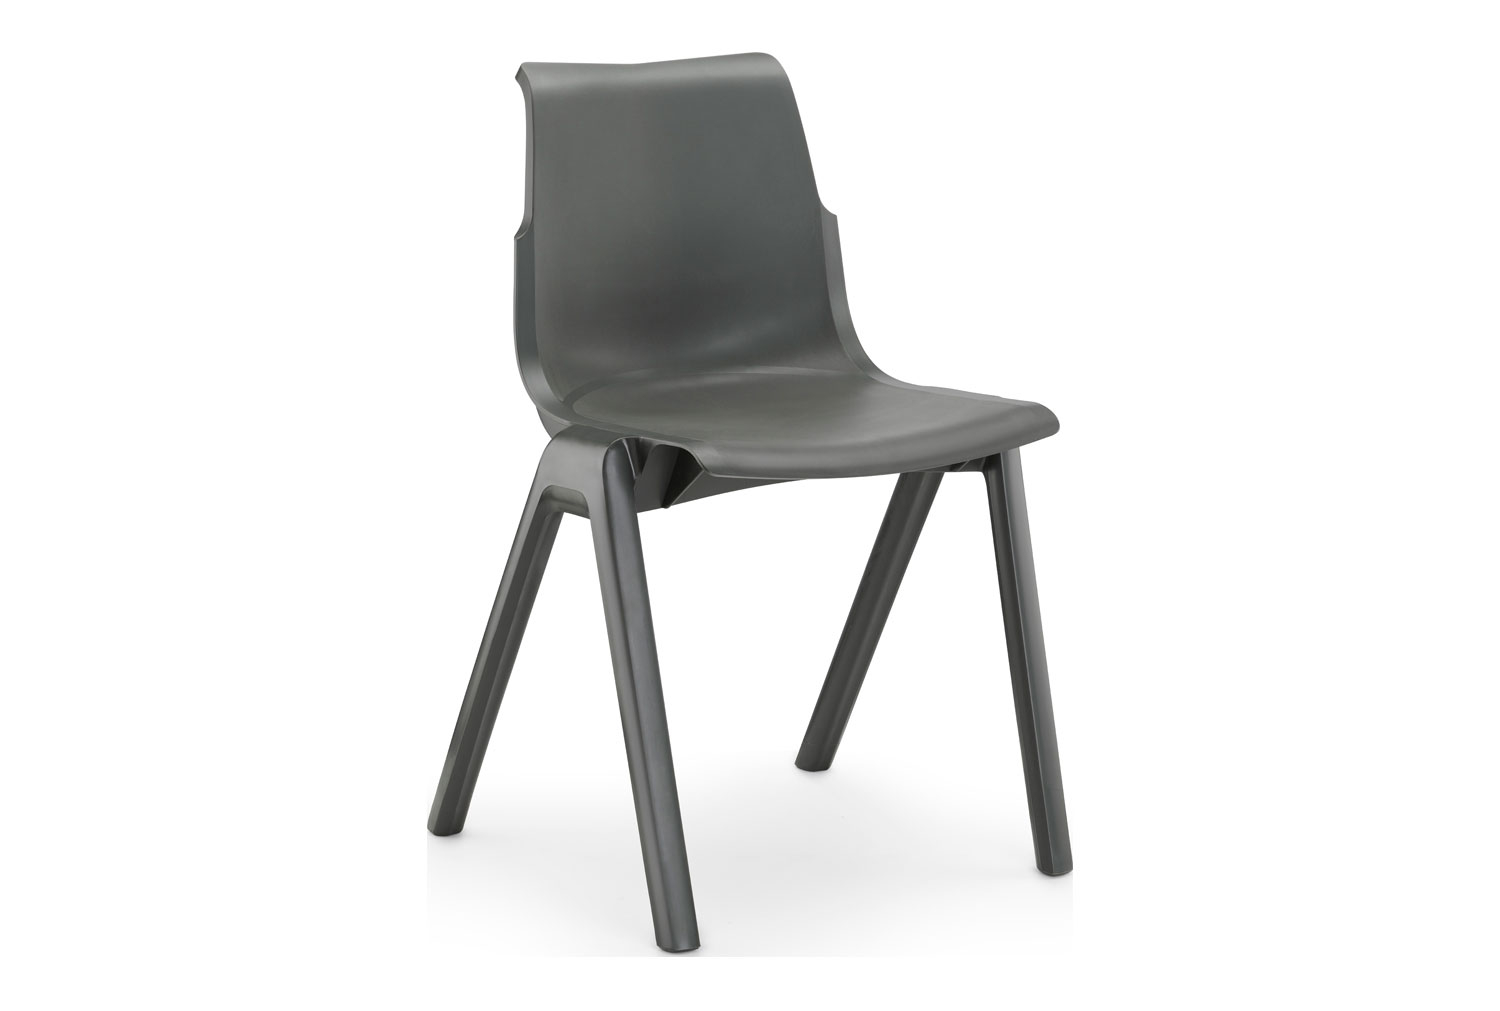 Qty 8 - Hille Ergo Stacking Classroom Chair, 14+ Years - 46h (cm), Charcoal